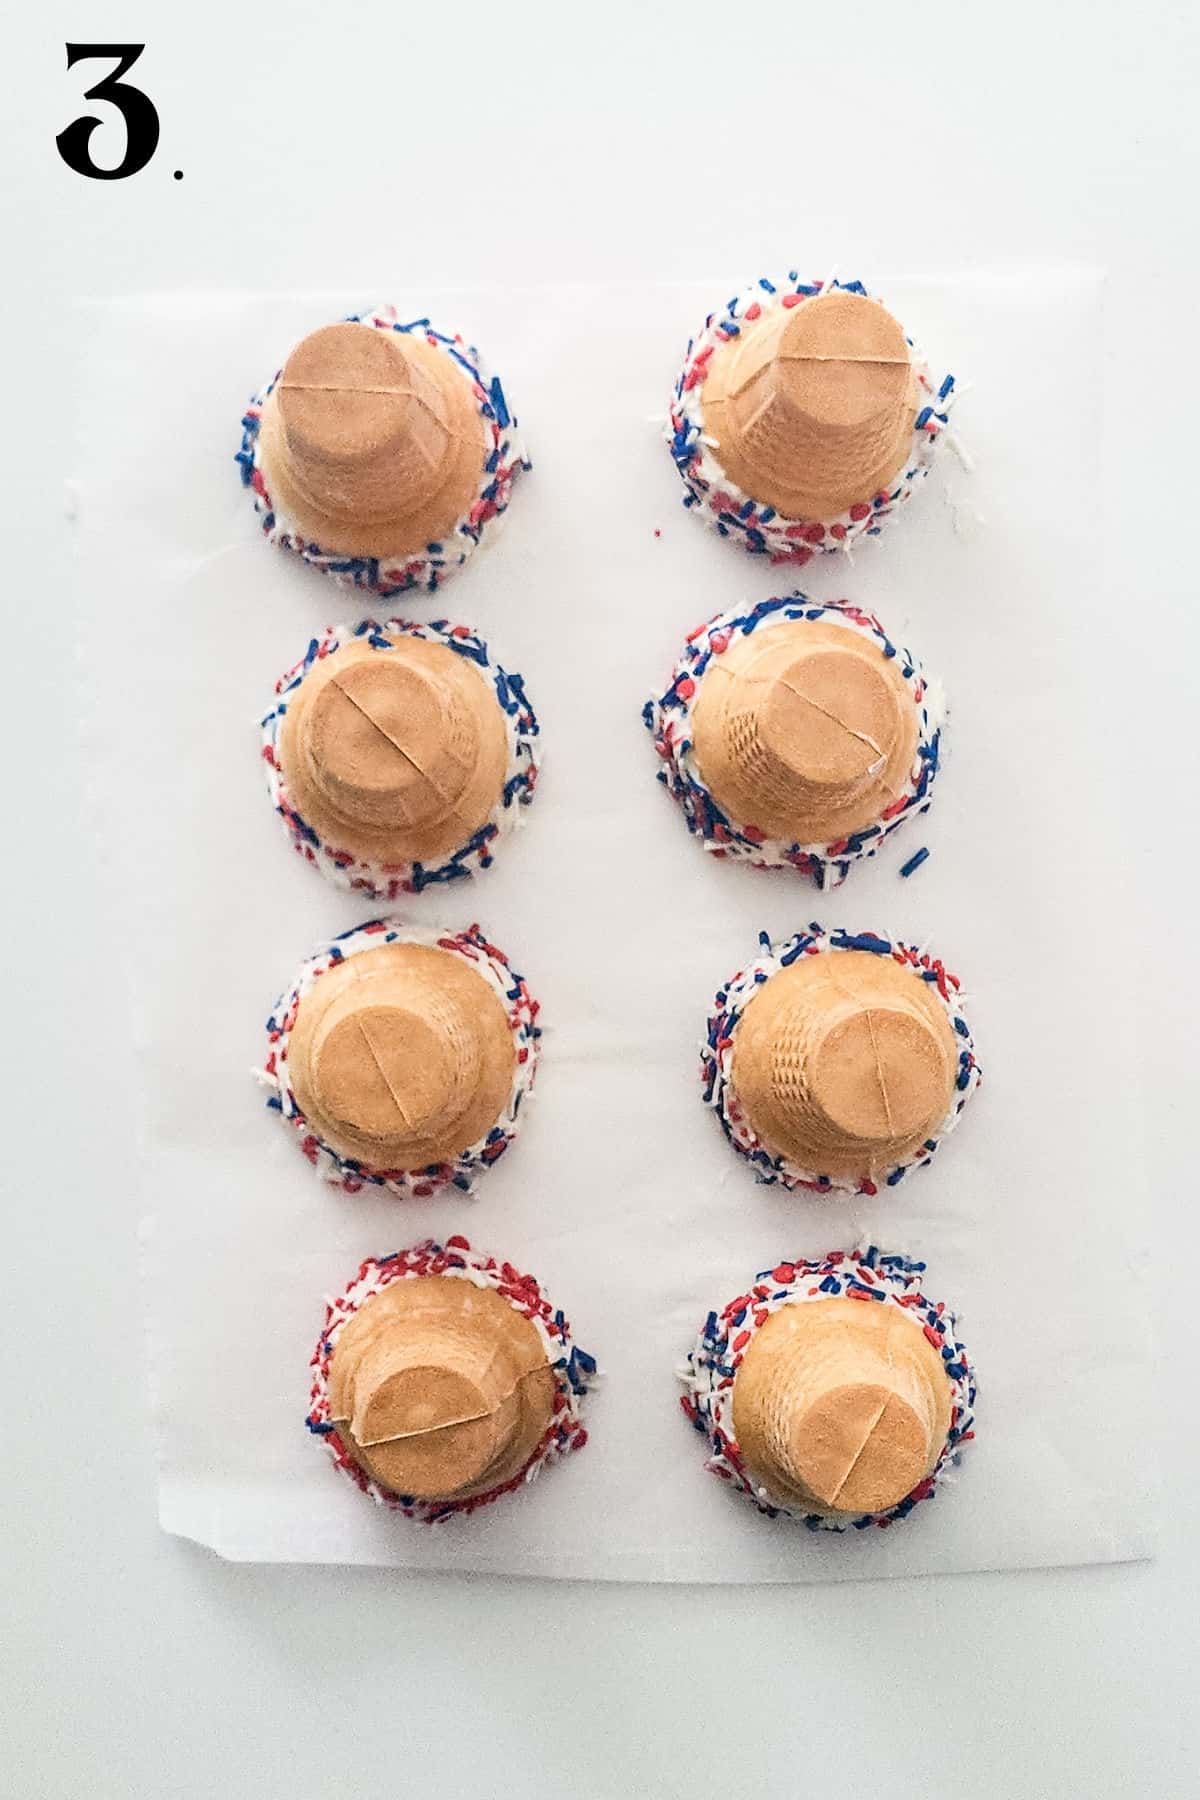 How to Make Cheesecake Mousse Cones Step 3 letting sprinkles set.